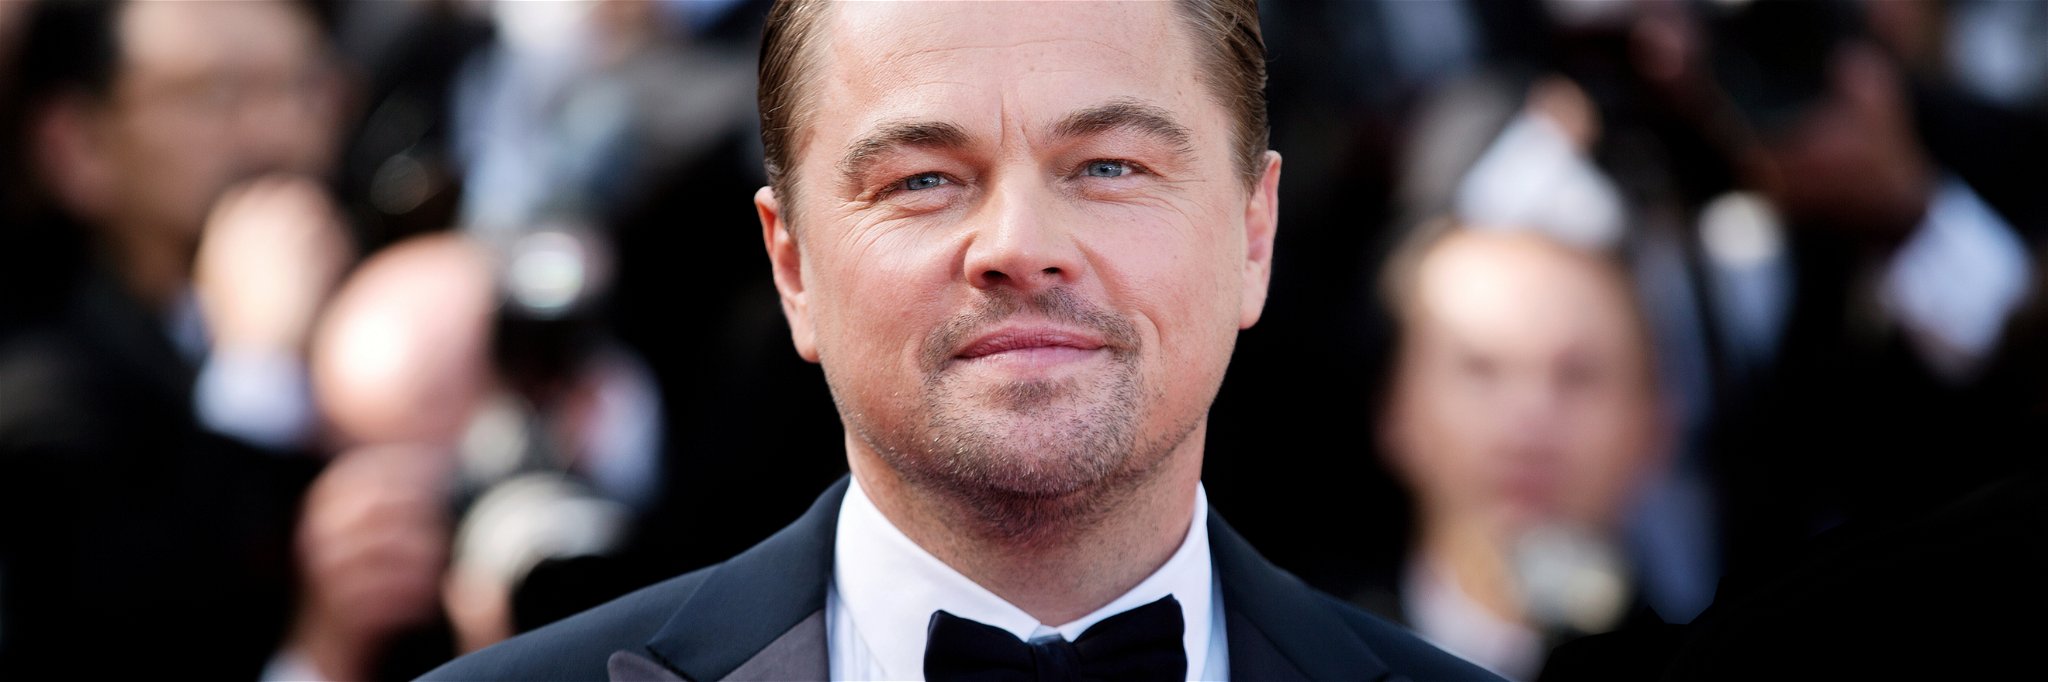 Leonardo DiCaprio is the latest investor to join Neat.